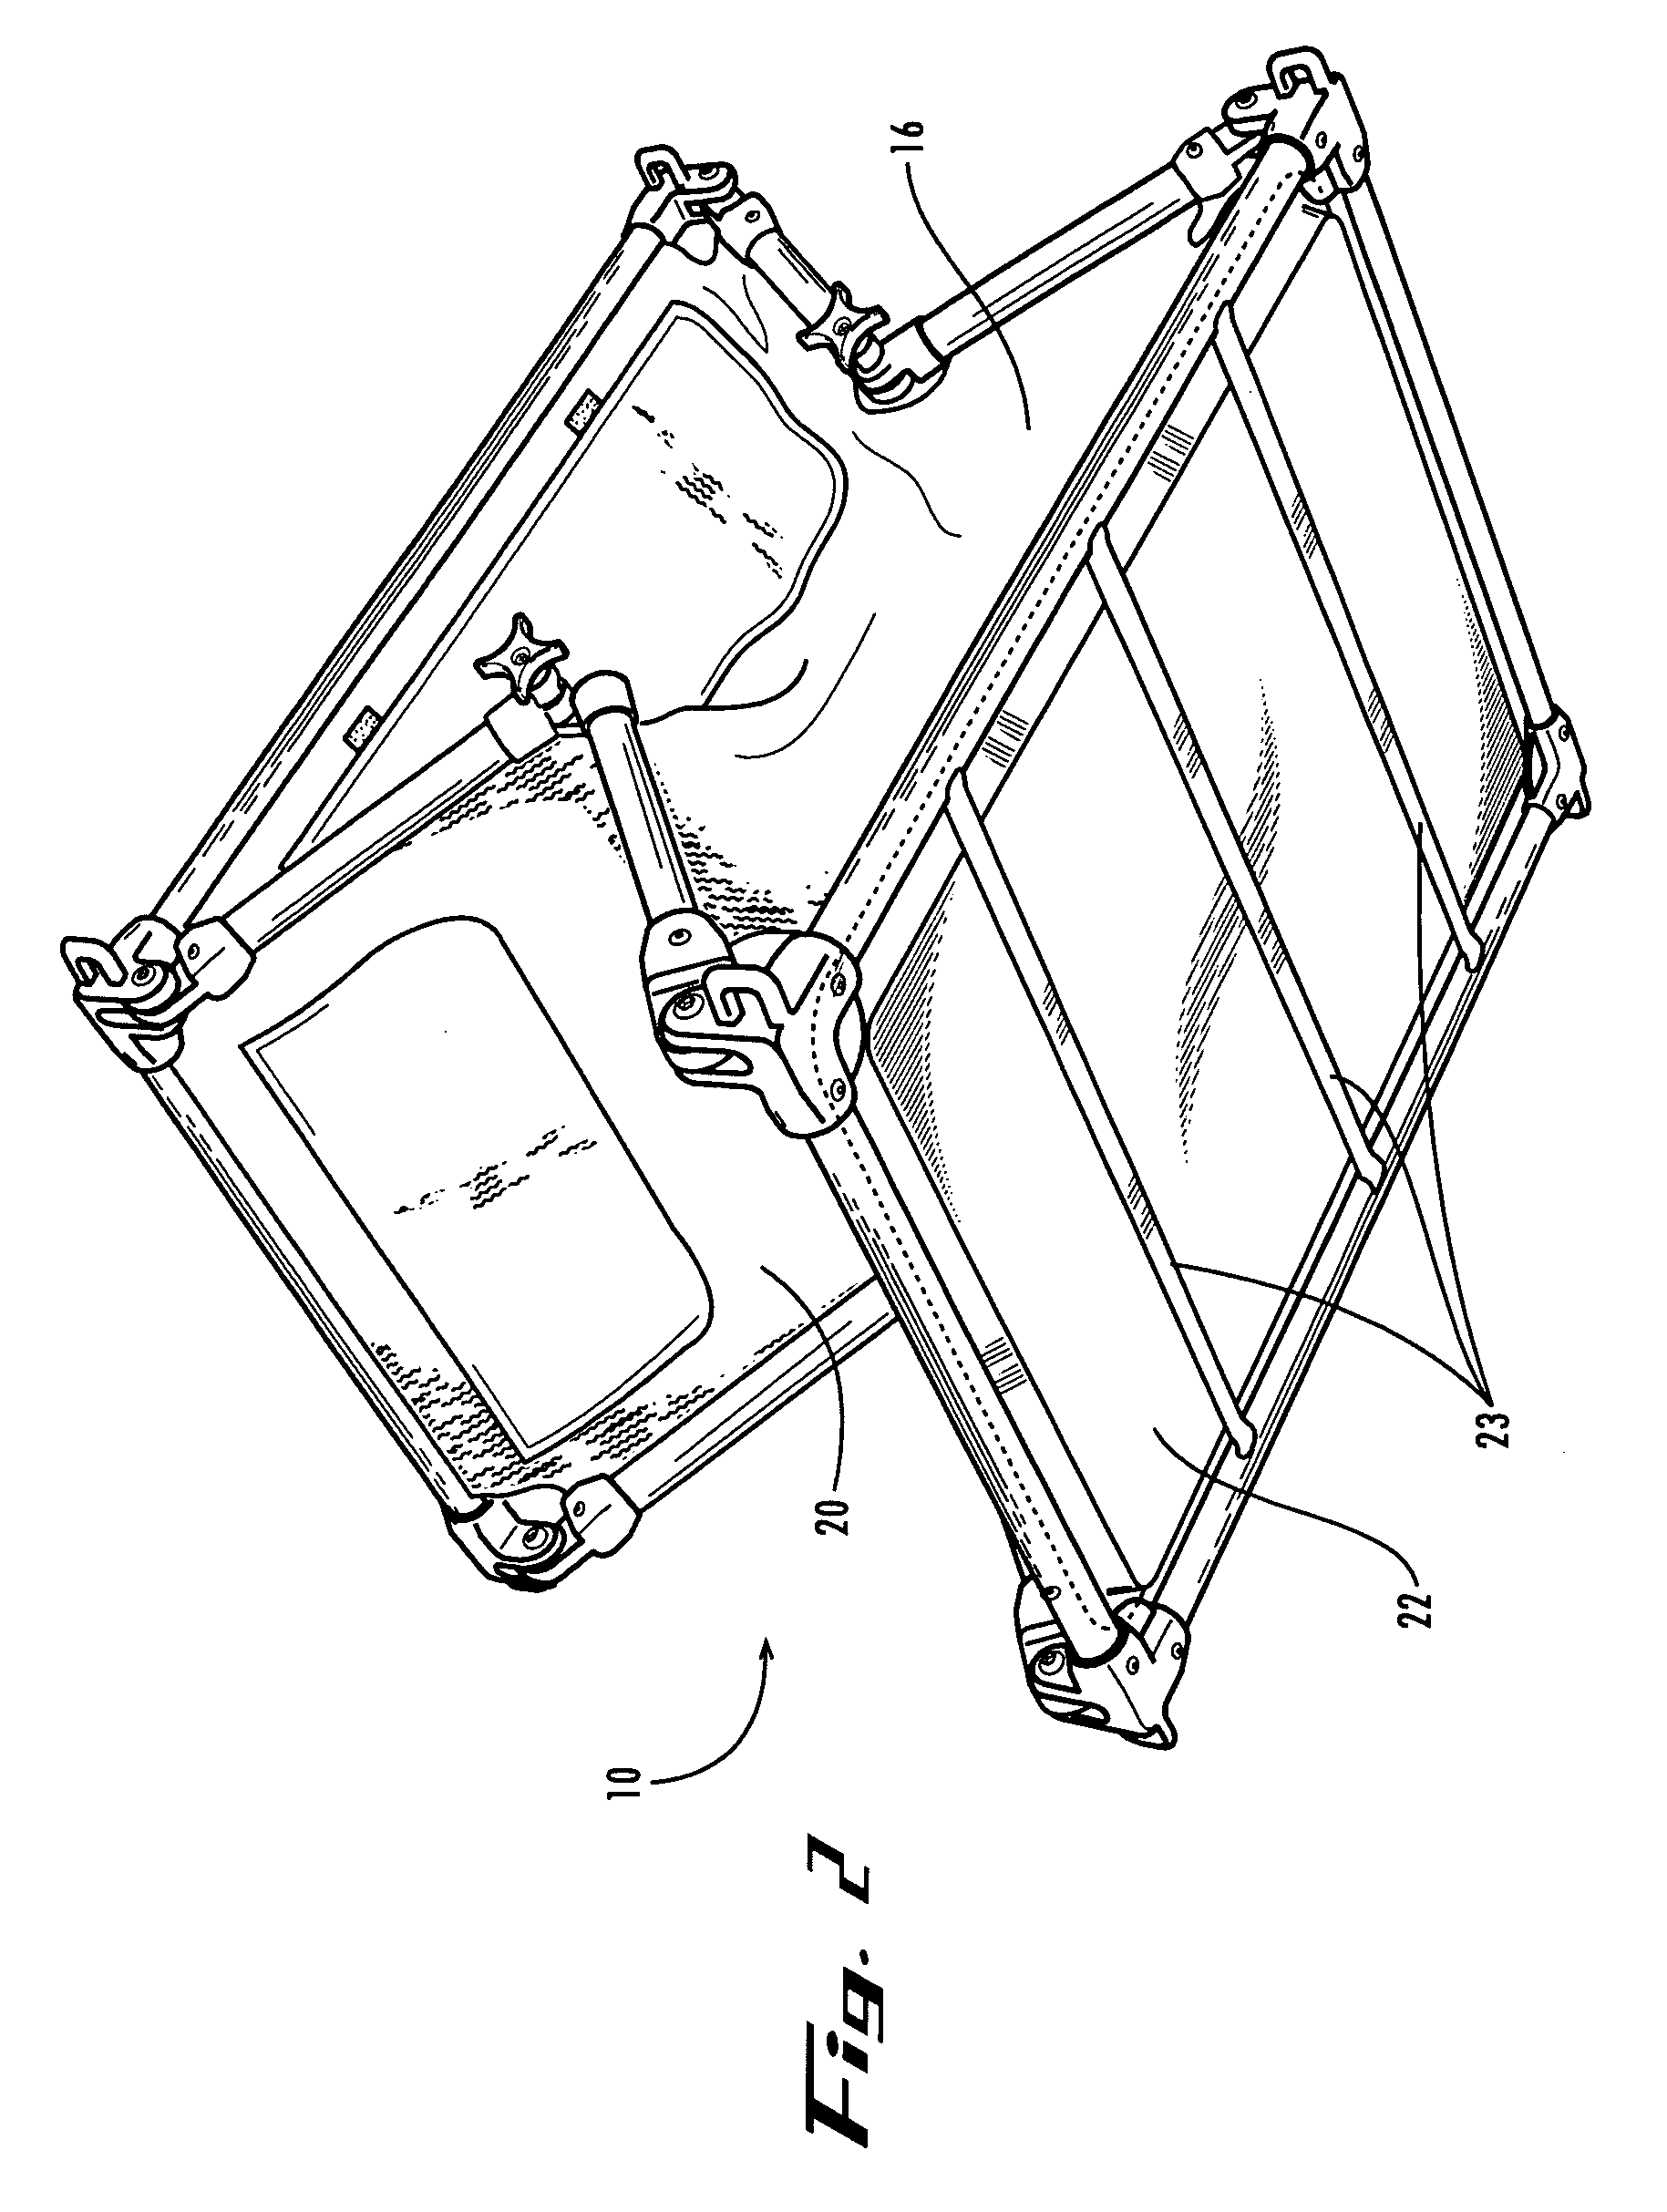 Collapsible pet housing